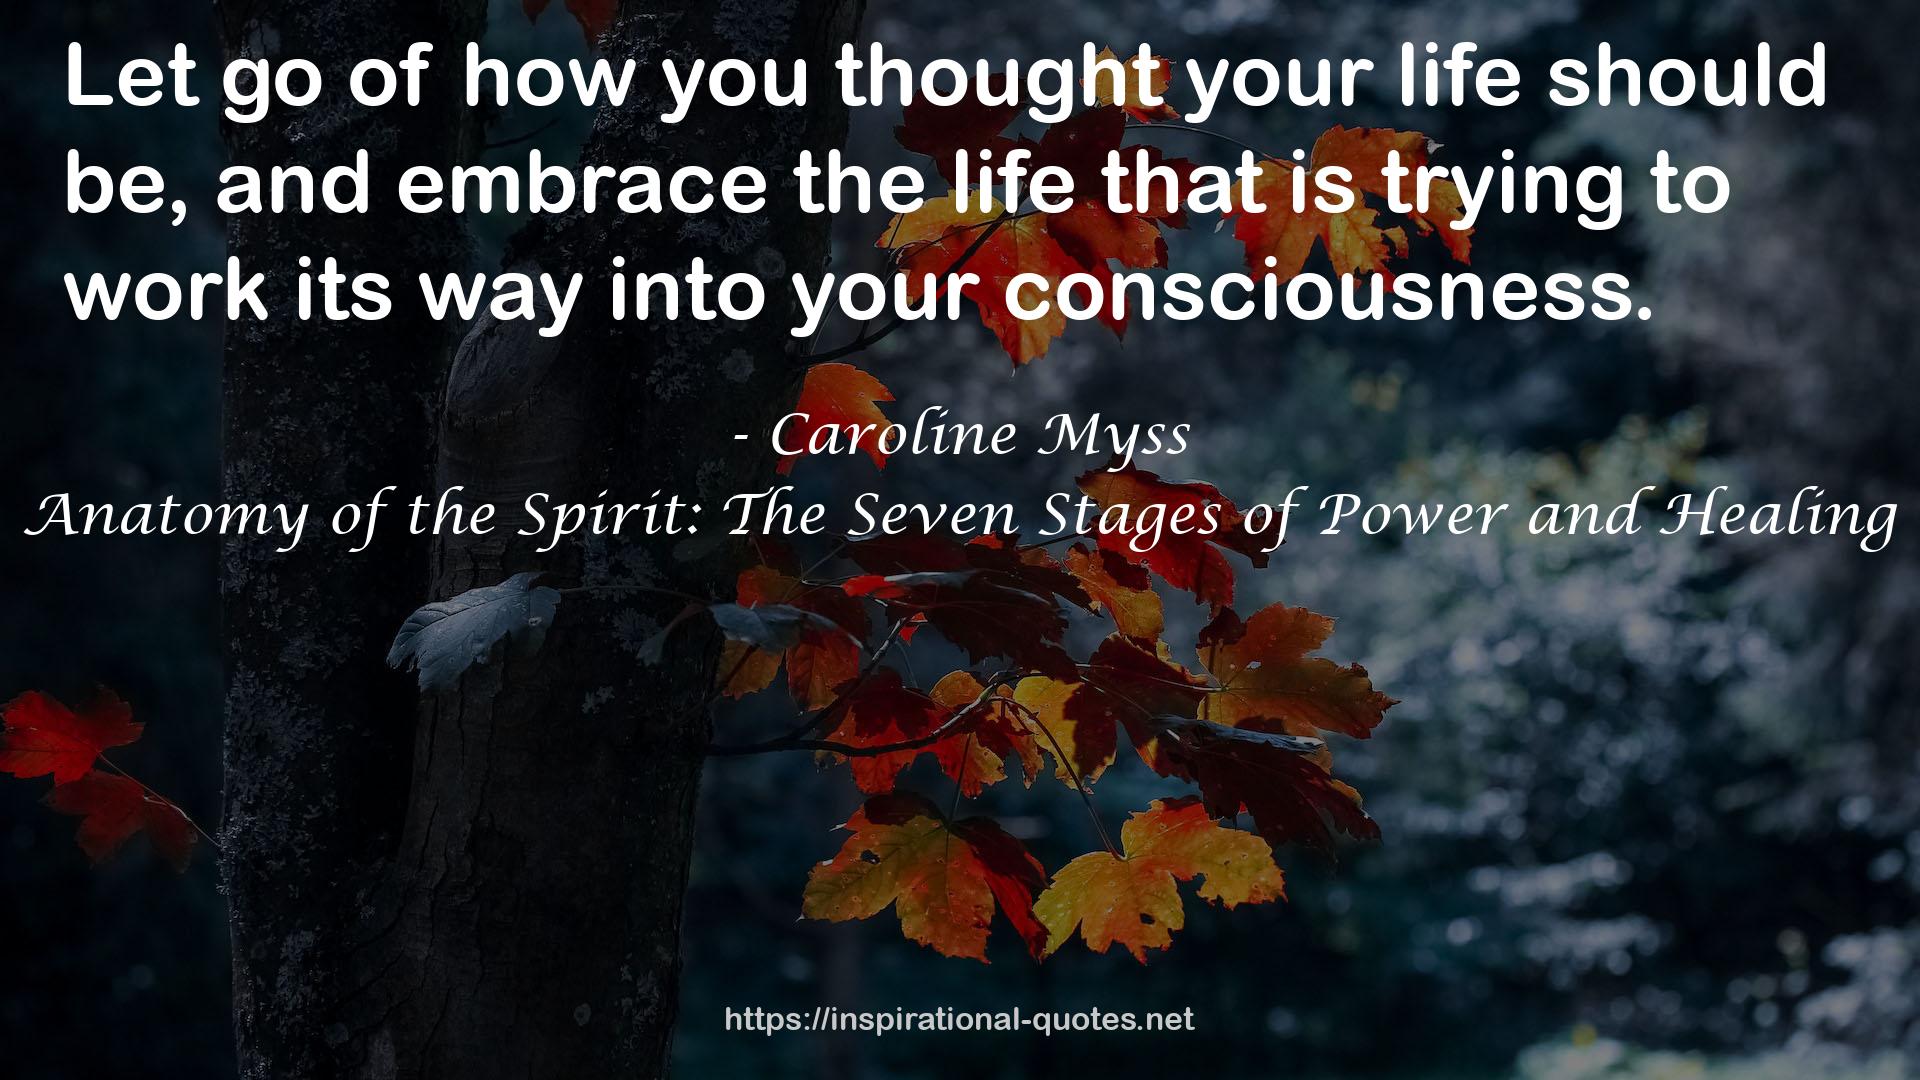 Anatomy of the Spirit: The Seven Stages of Power and Healing QUOTES